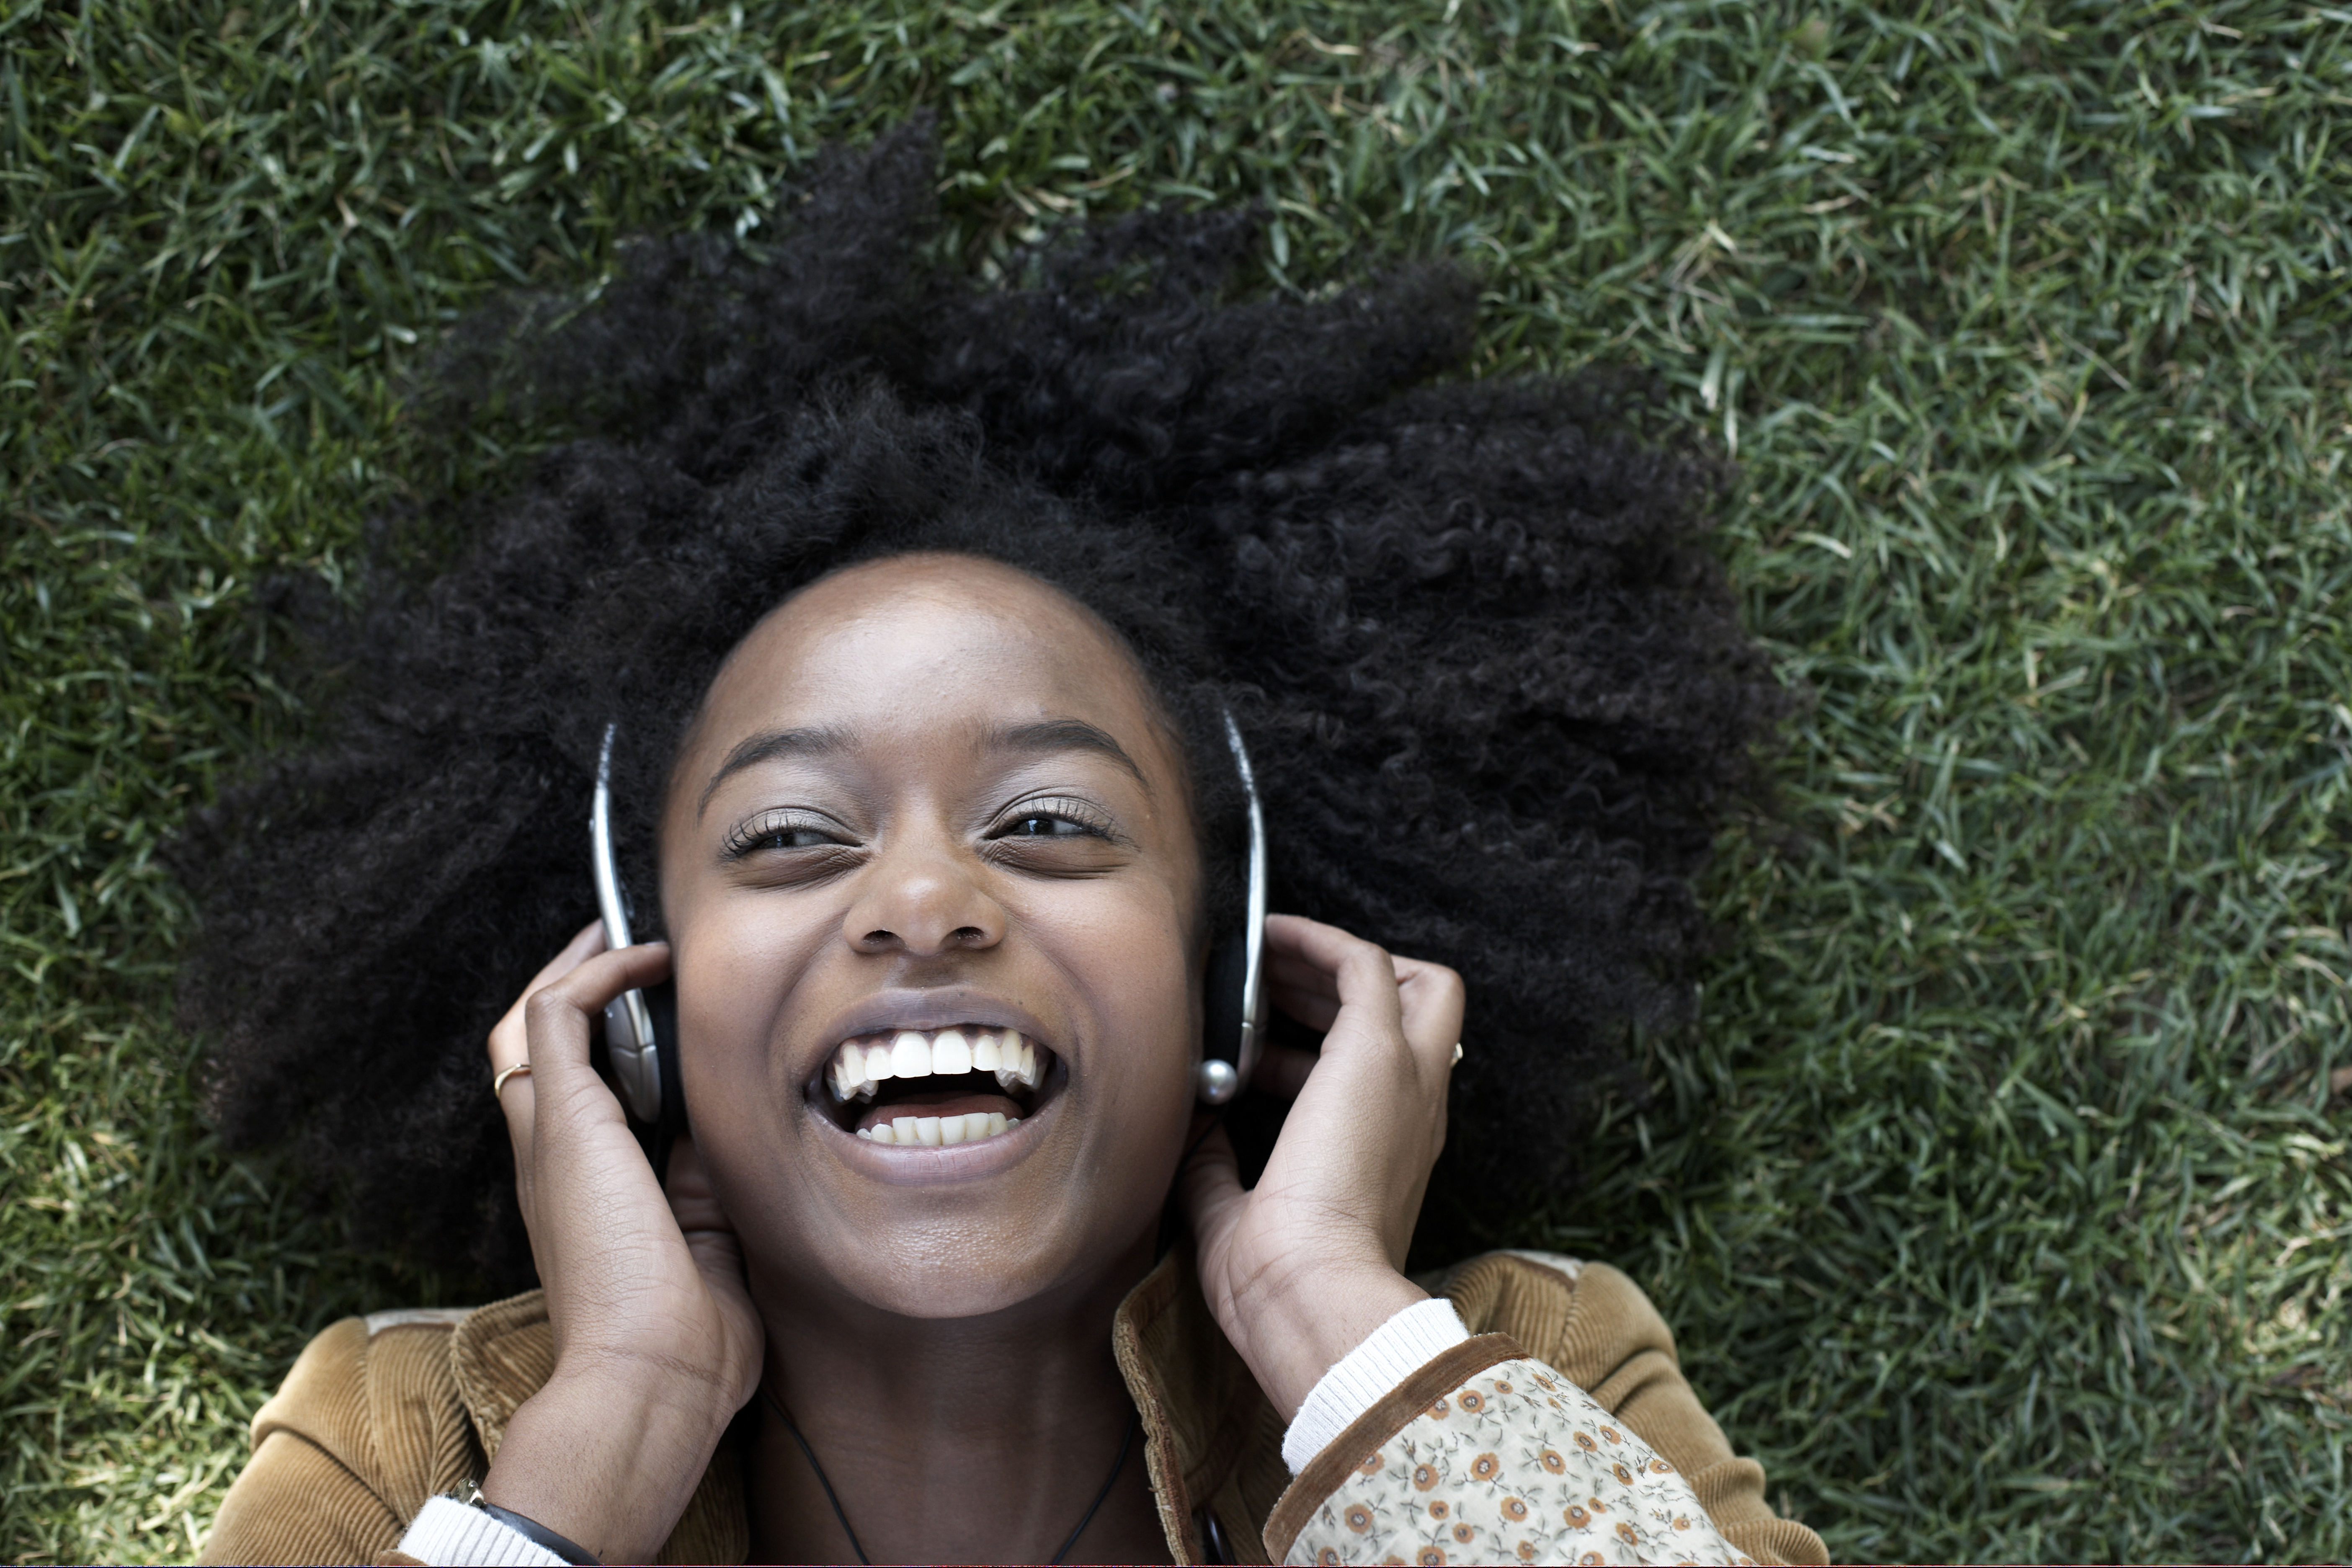 They listening to music now. Афро эмоции. Happy Black. Happy Black people. Happy Black woman.